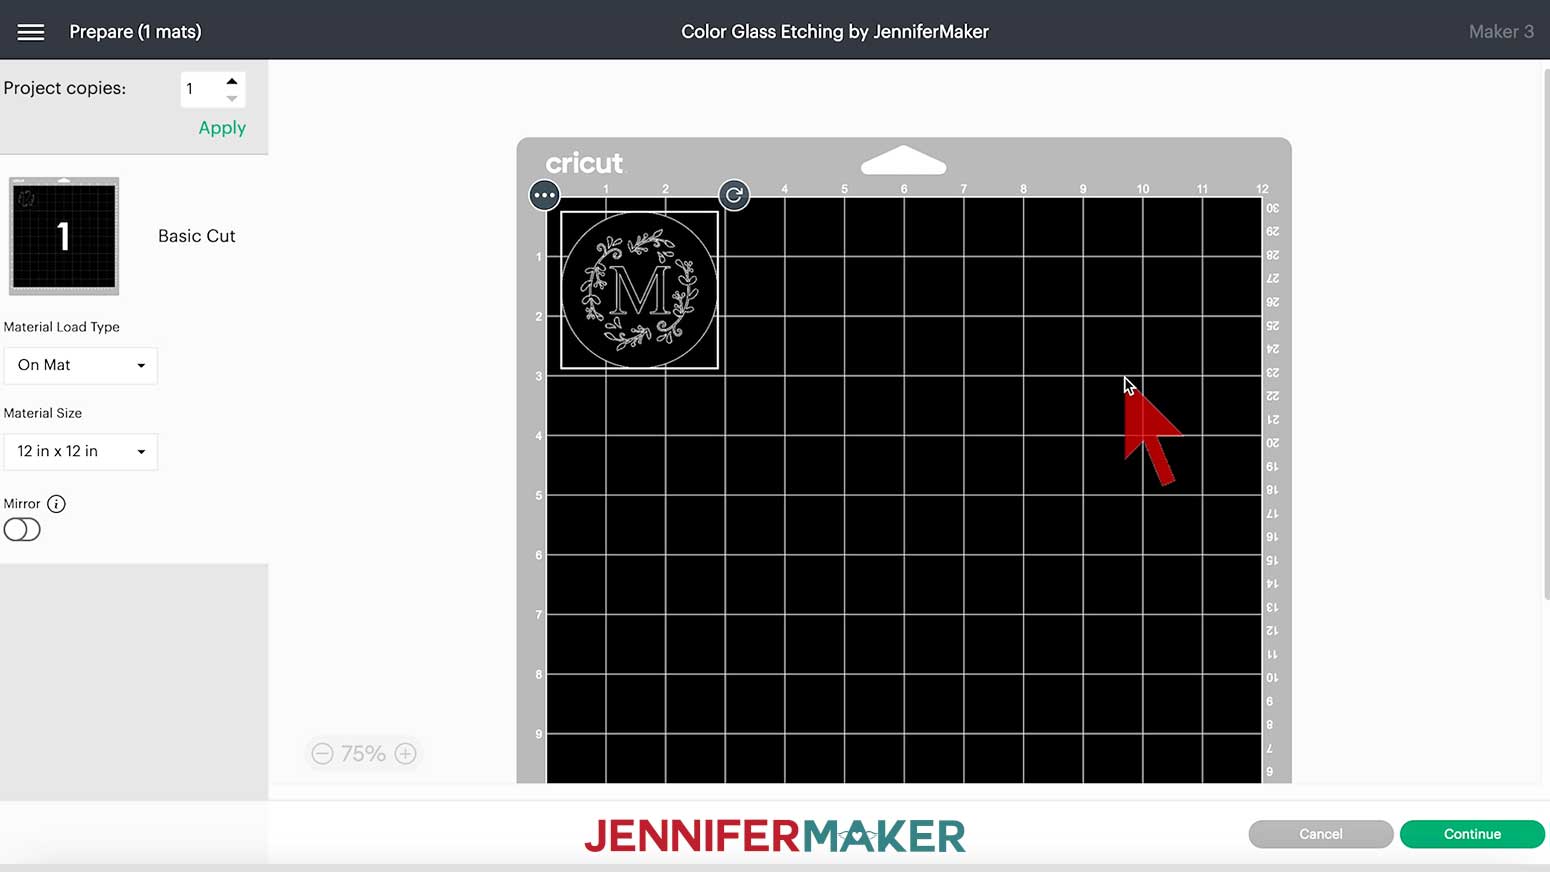 A screenshot showing the customized wine glass design for the color glass etching project on the Prepare screen in Cricut Design Space, with the design aligned at the top left of the mat and the settings showing Basic Cut, On Mat for the Load Type, 12 by 12 inches for the Material Size, and Mirror Off